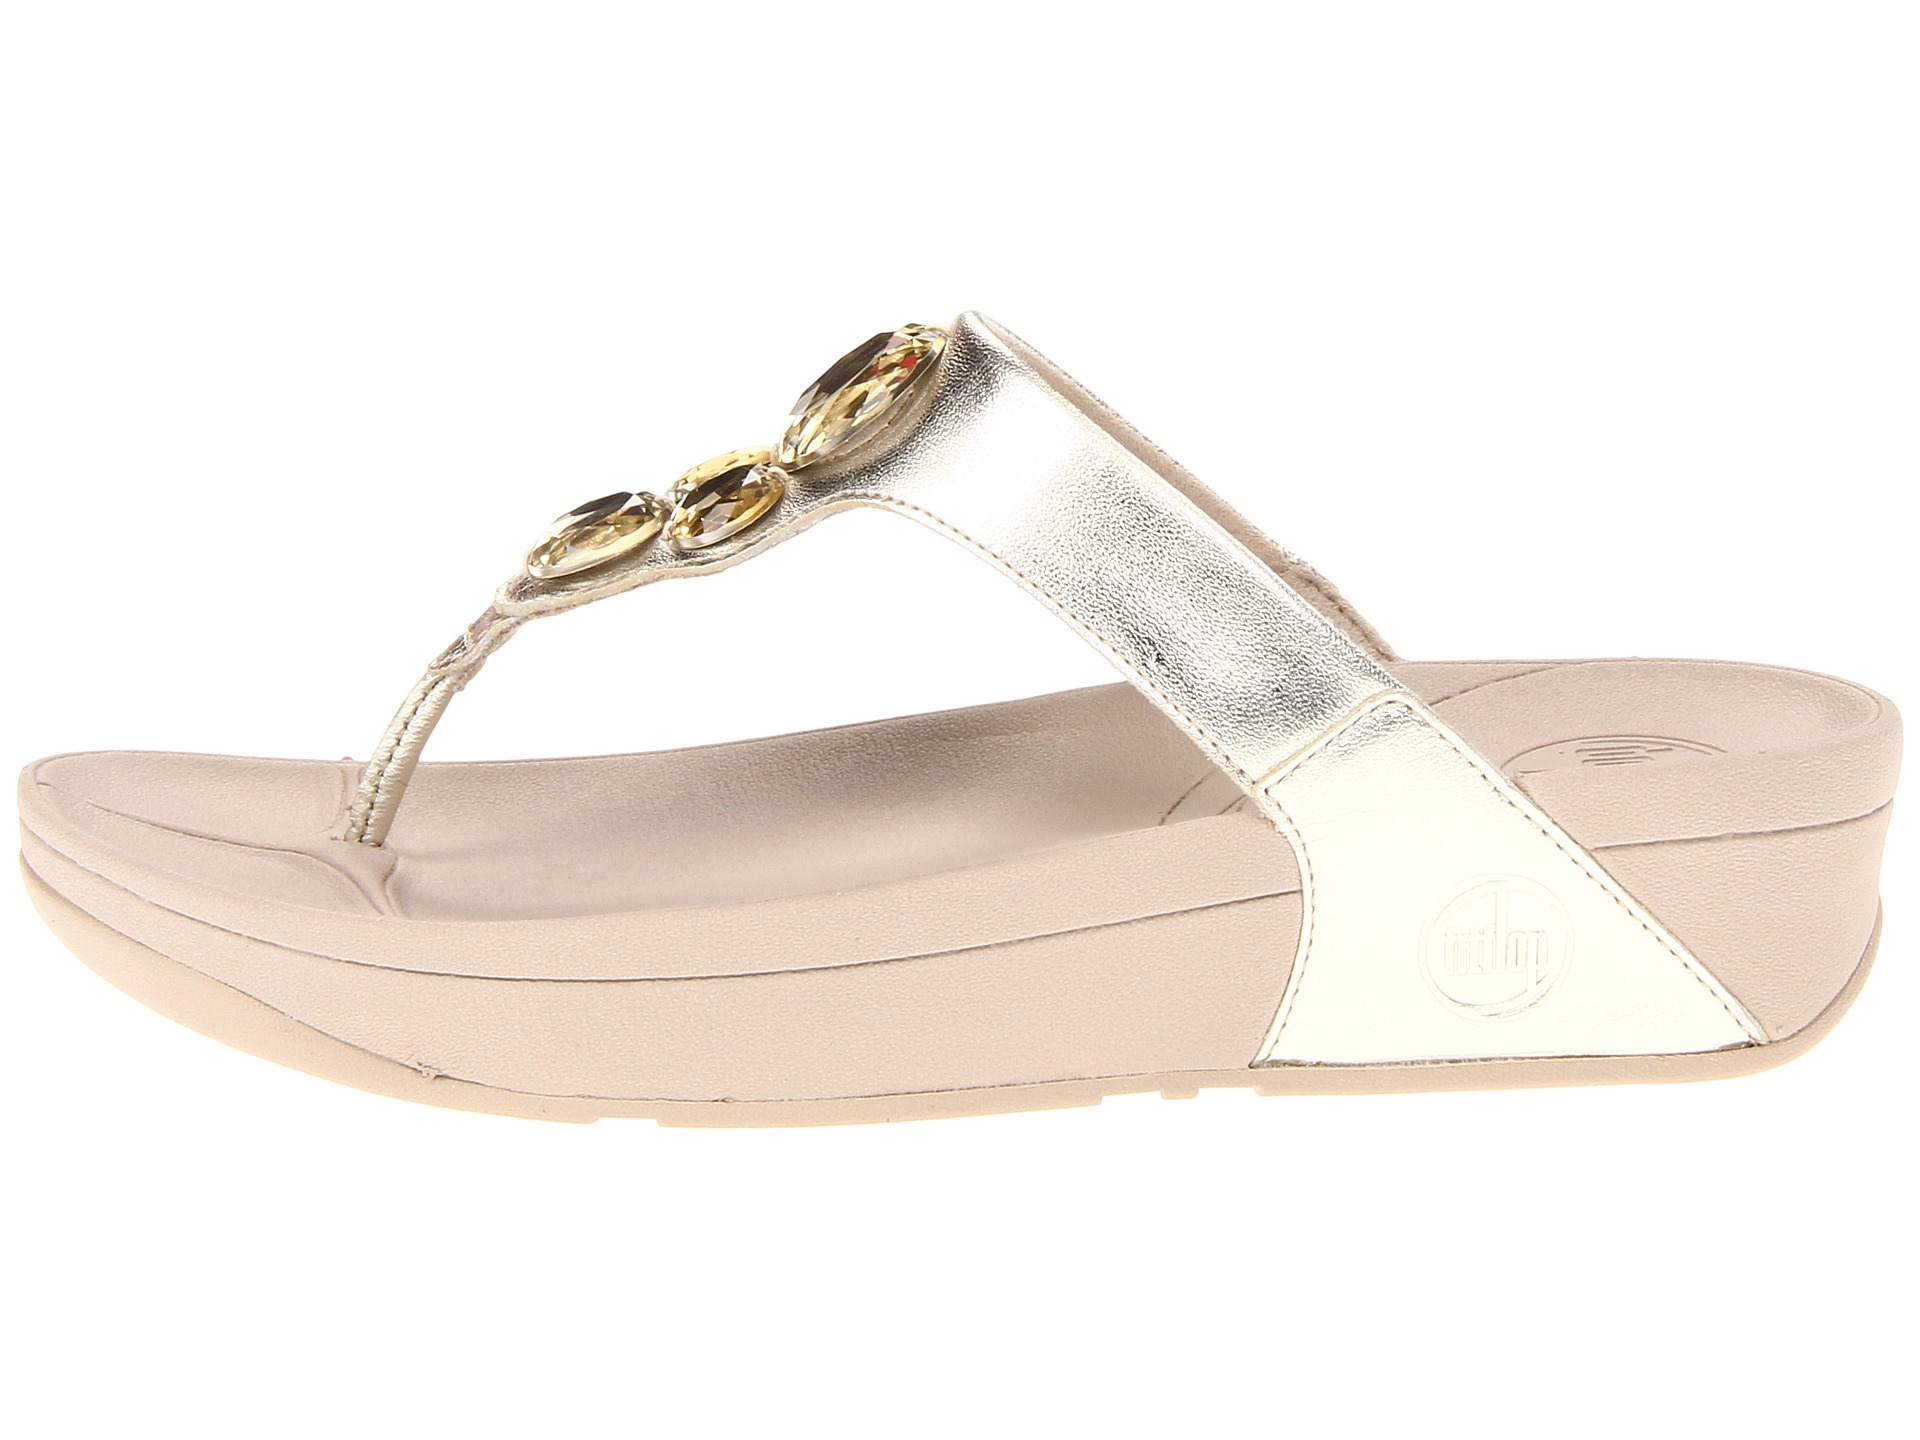 No results for fitflop lunetta - Search Zappos